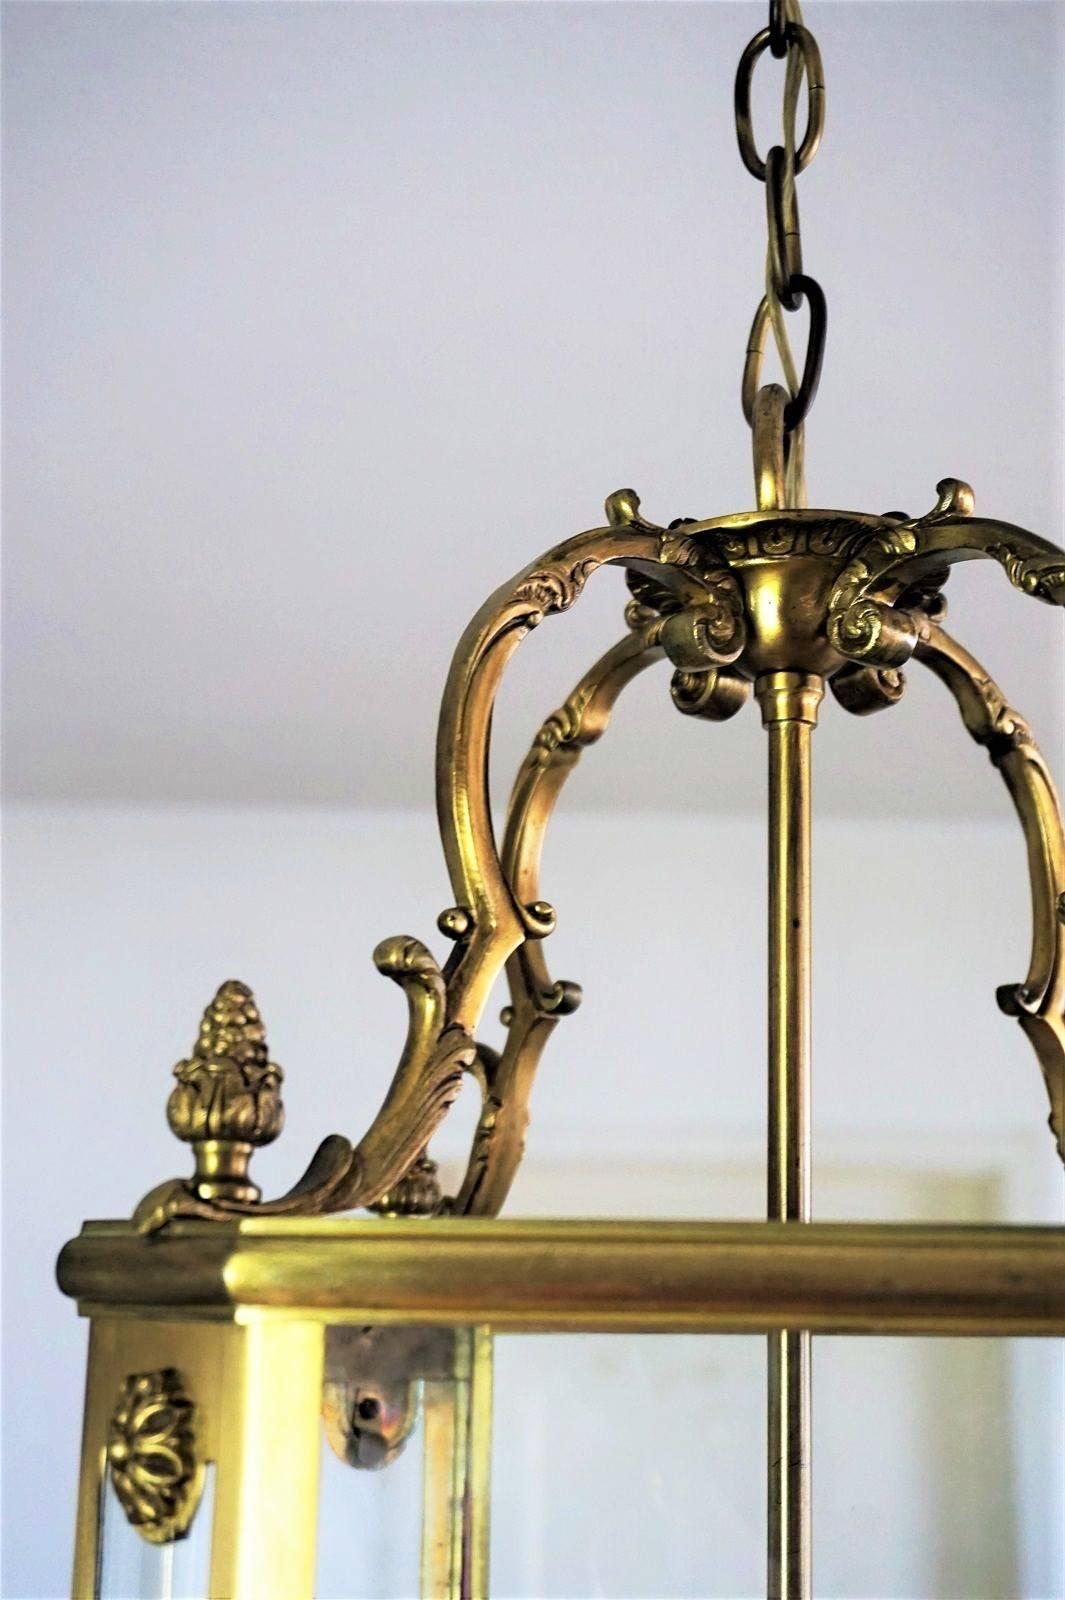 Mid-20th Century French Art Deco Brass Four Light Lantern Pendant with Bronze Accents, circa 1940